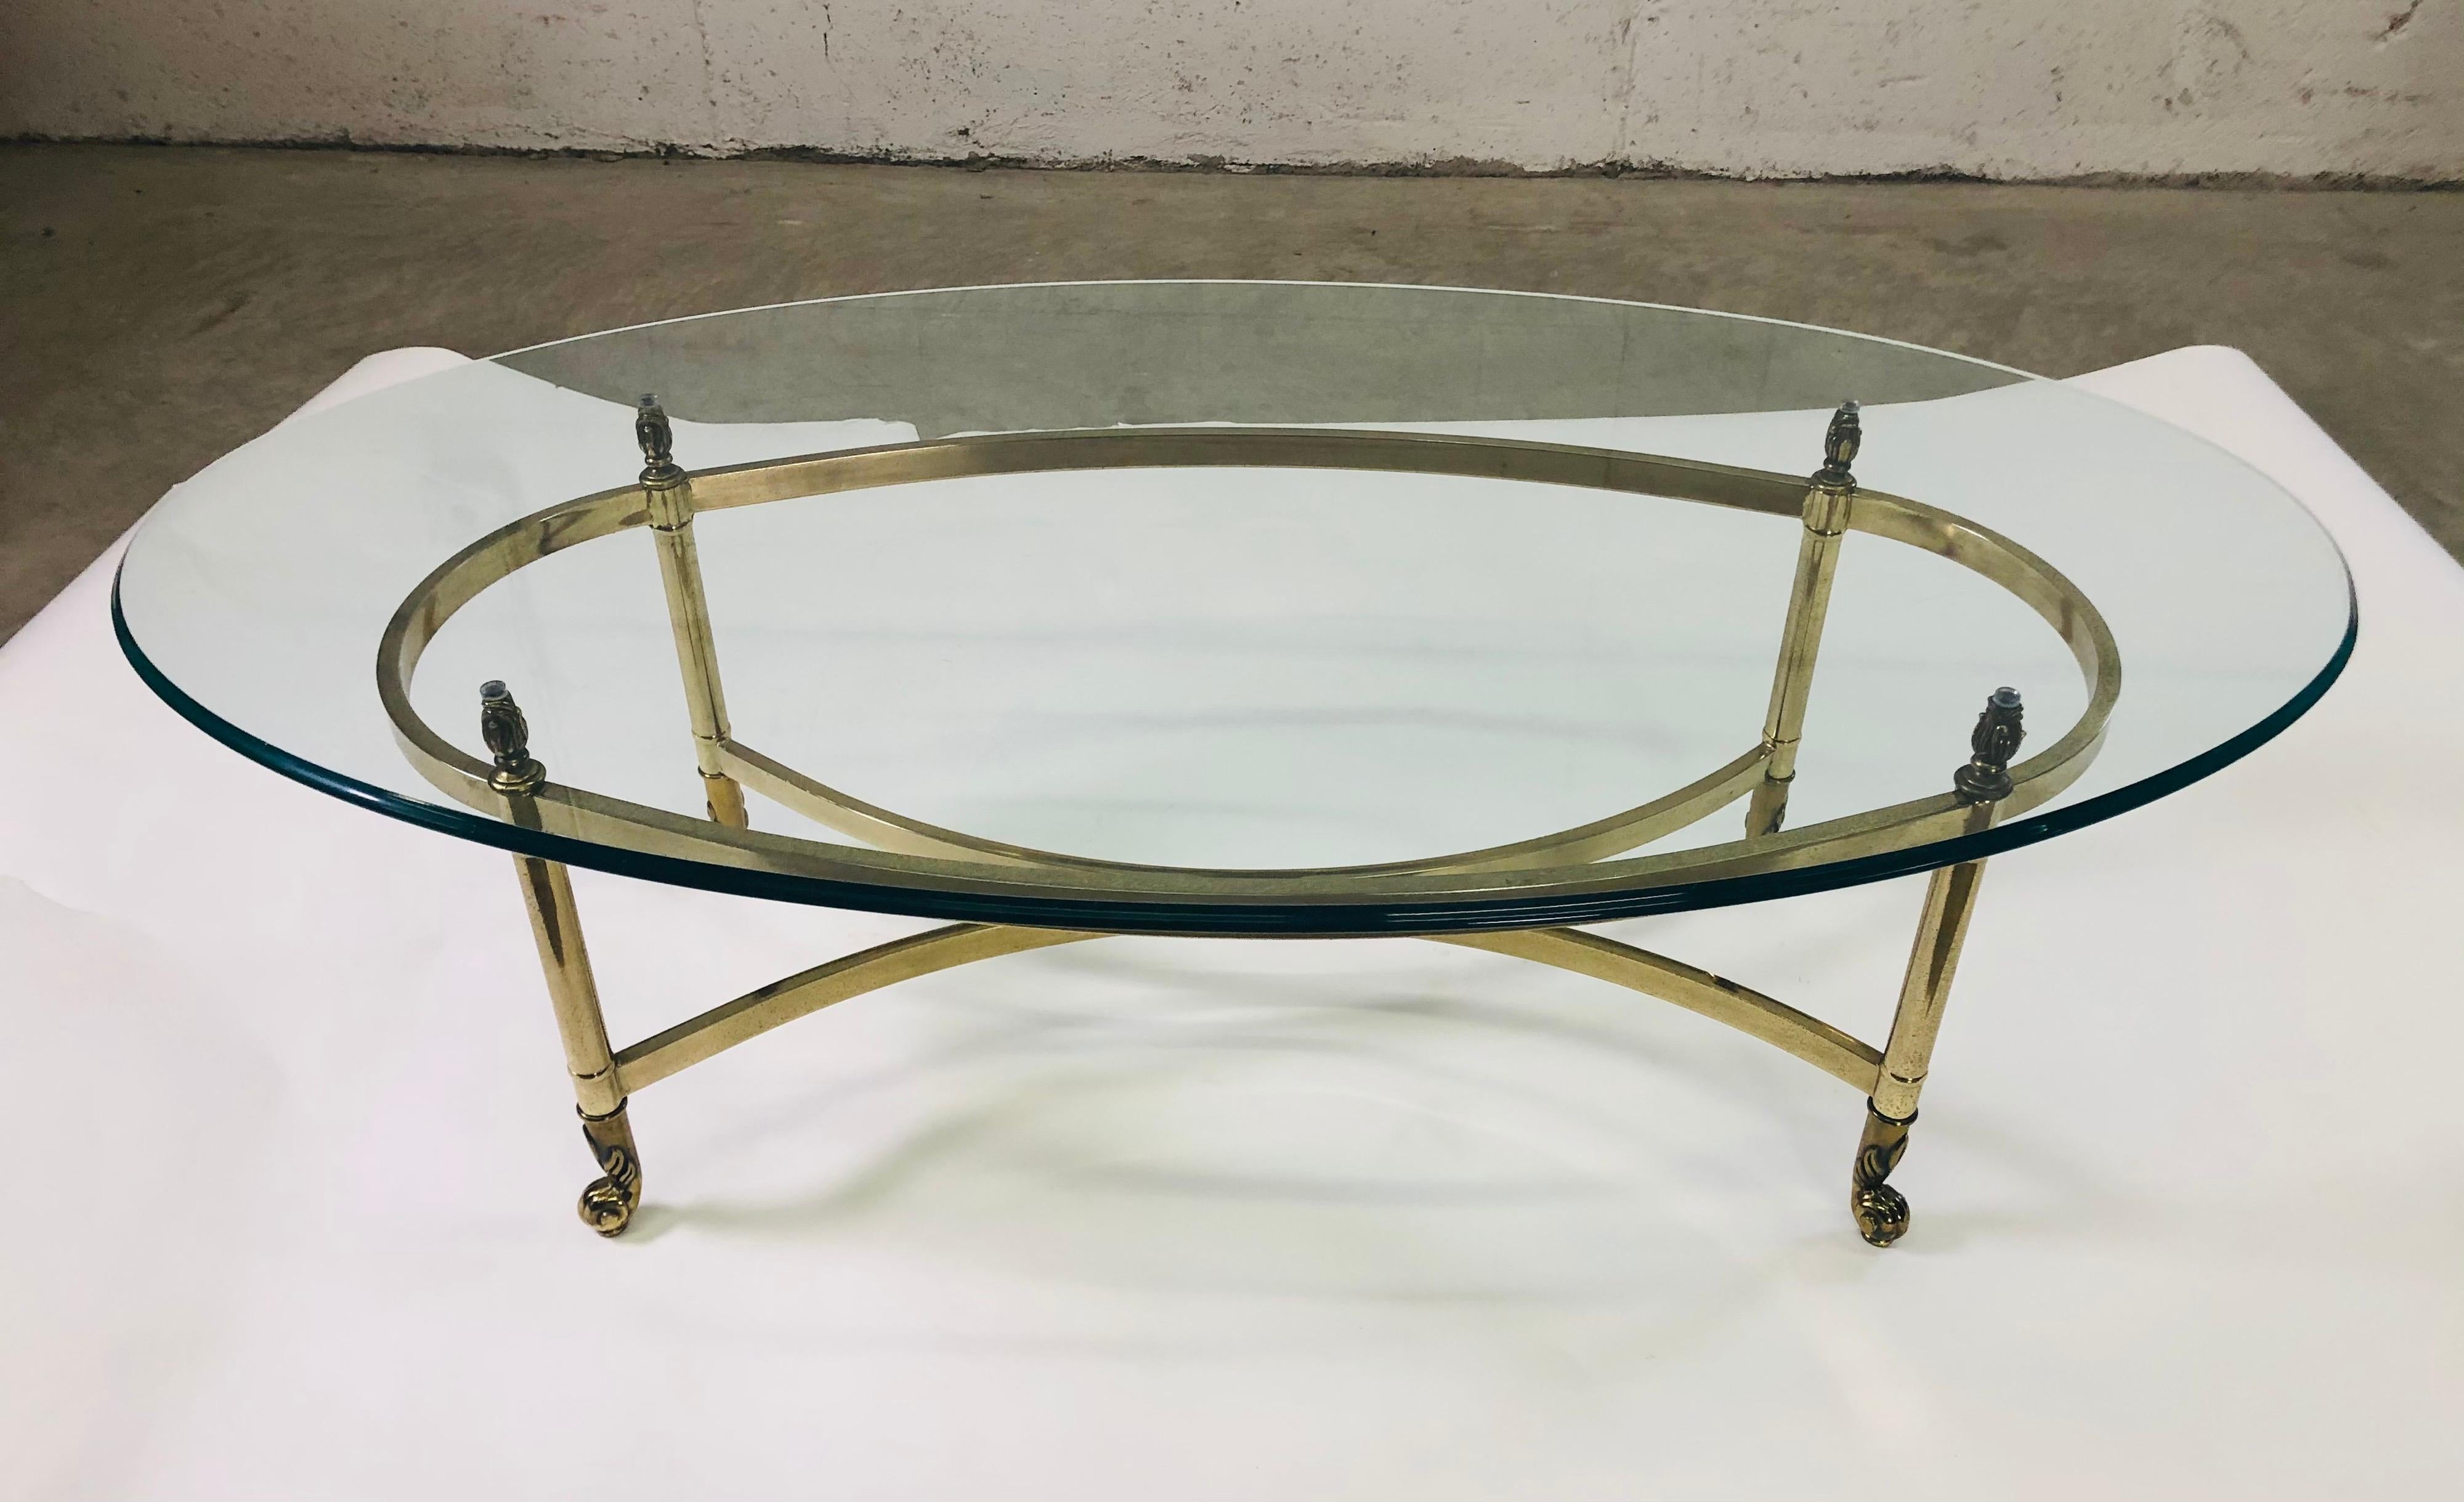 Vintage 1960s oval glass top with brass base coffee table by Labarge. The table has scroll brass feet. No marks.